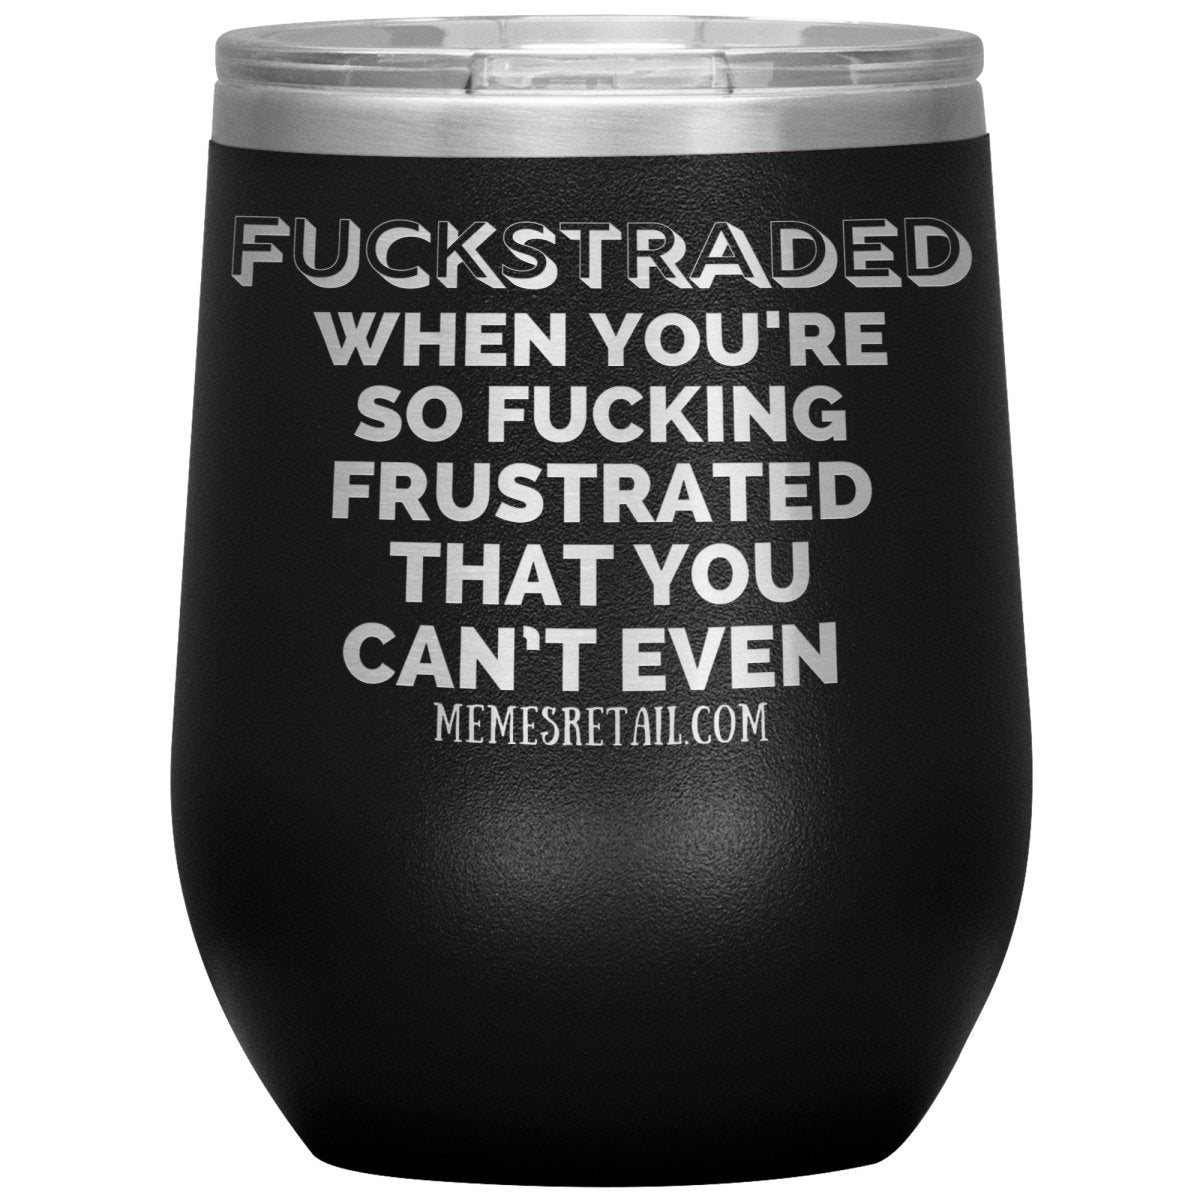 Fuckstraded, When You're So Fucking Frustrated That You Can’t Even Tumblers, 12oz Wine Insulated Tumbler / Black - MemesRetail.com